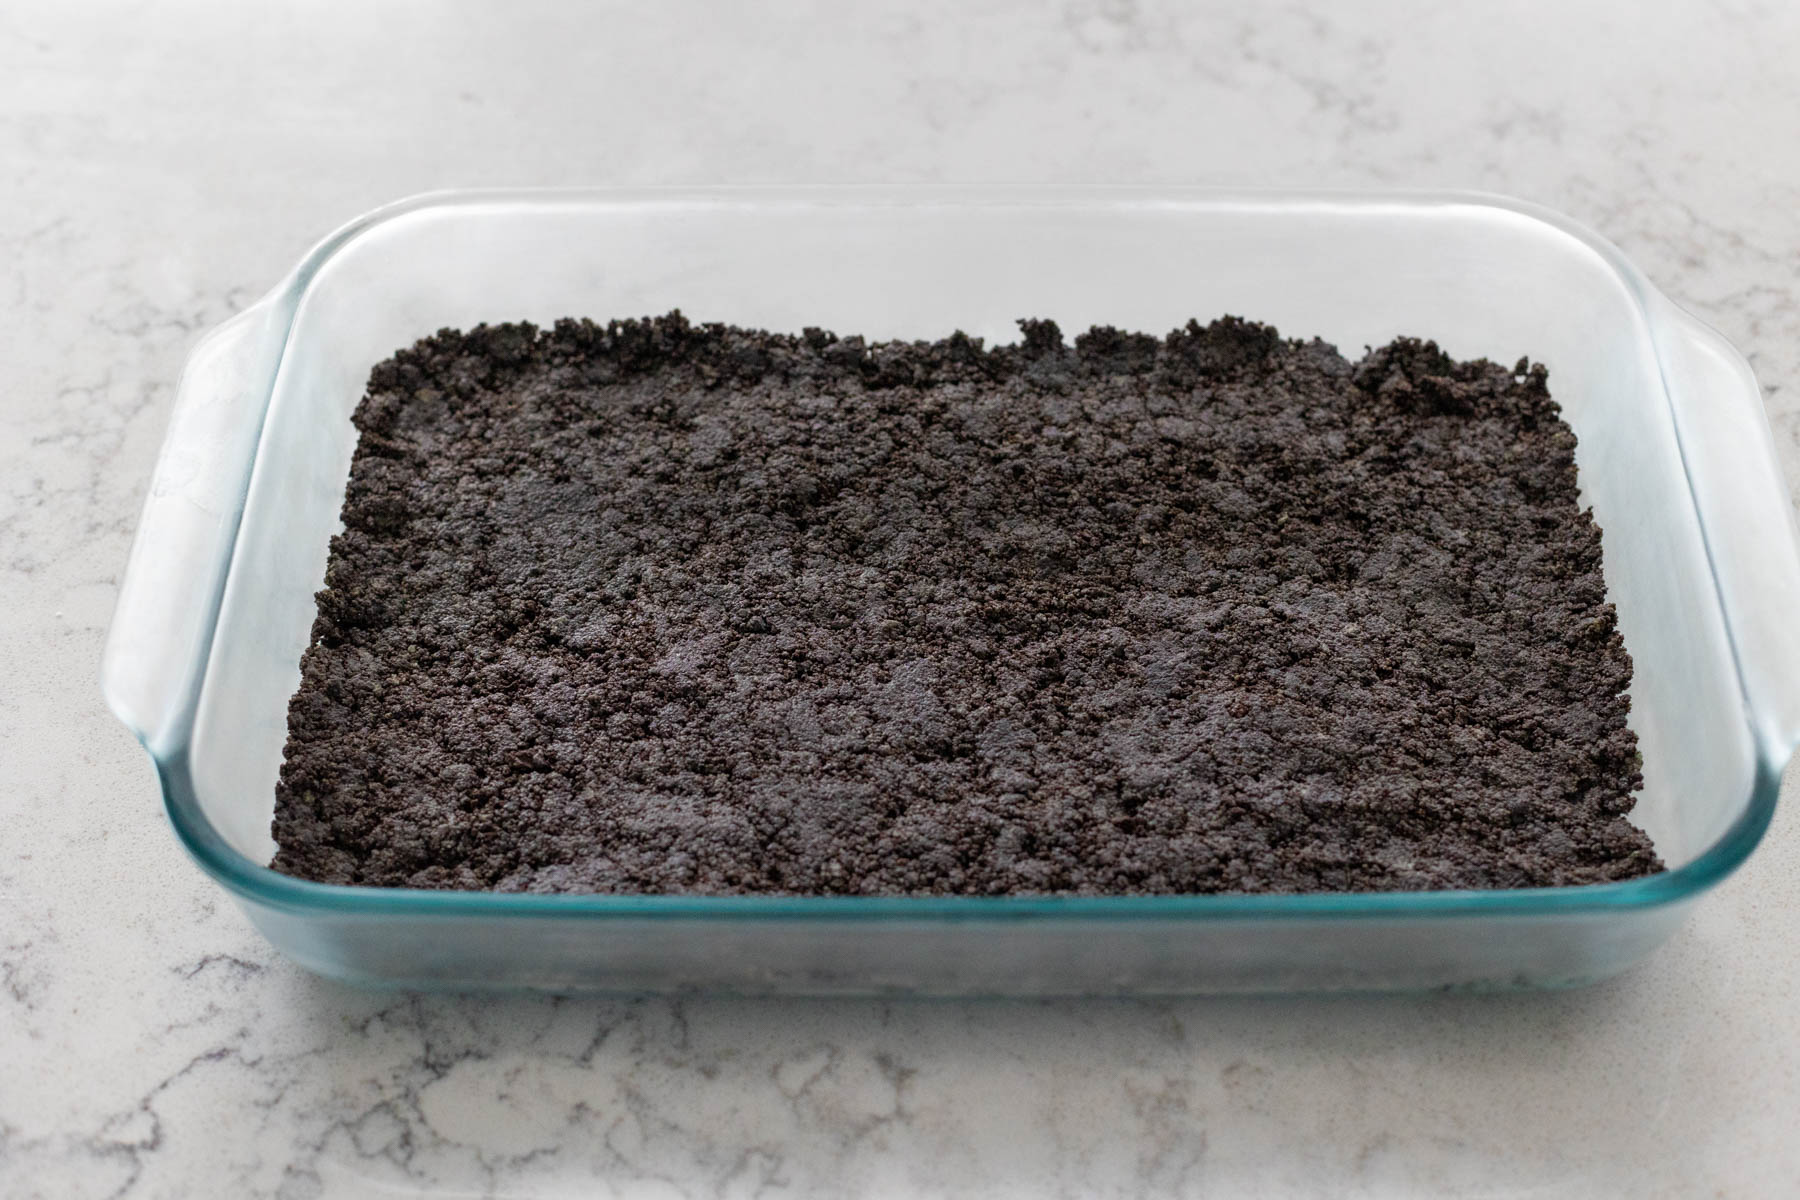 A 9x13-inch baking pan has an Oreo cookie crust waiting to be topped with a no bake dessert.